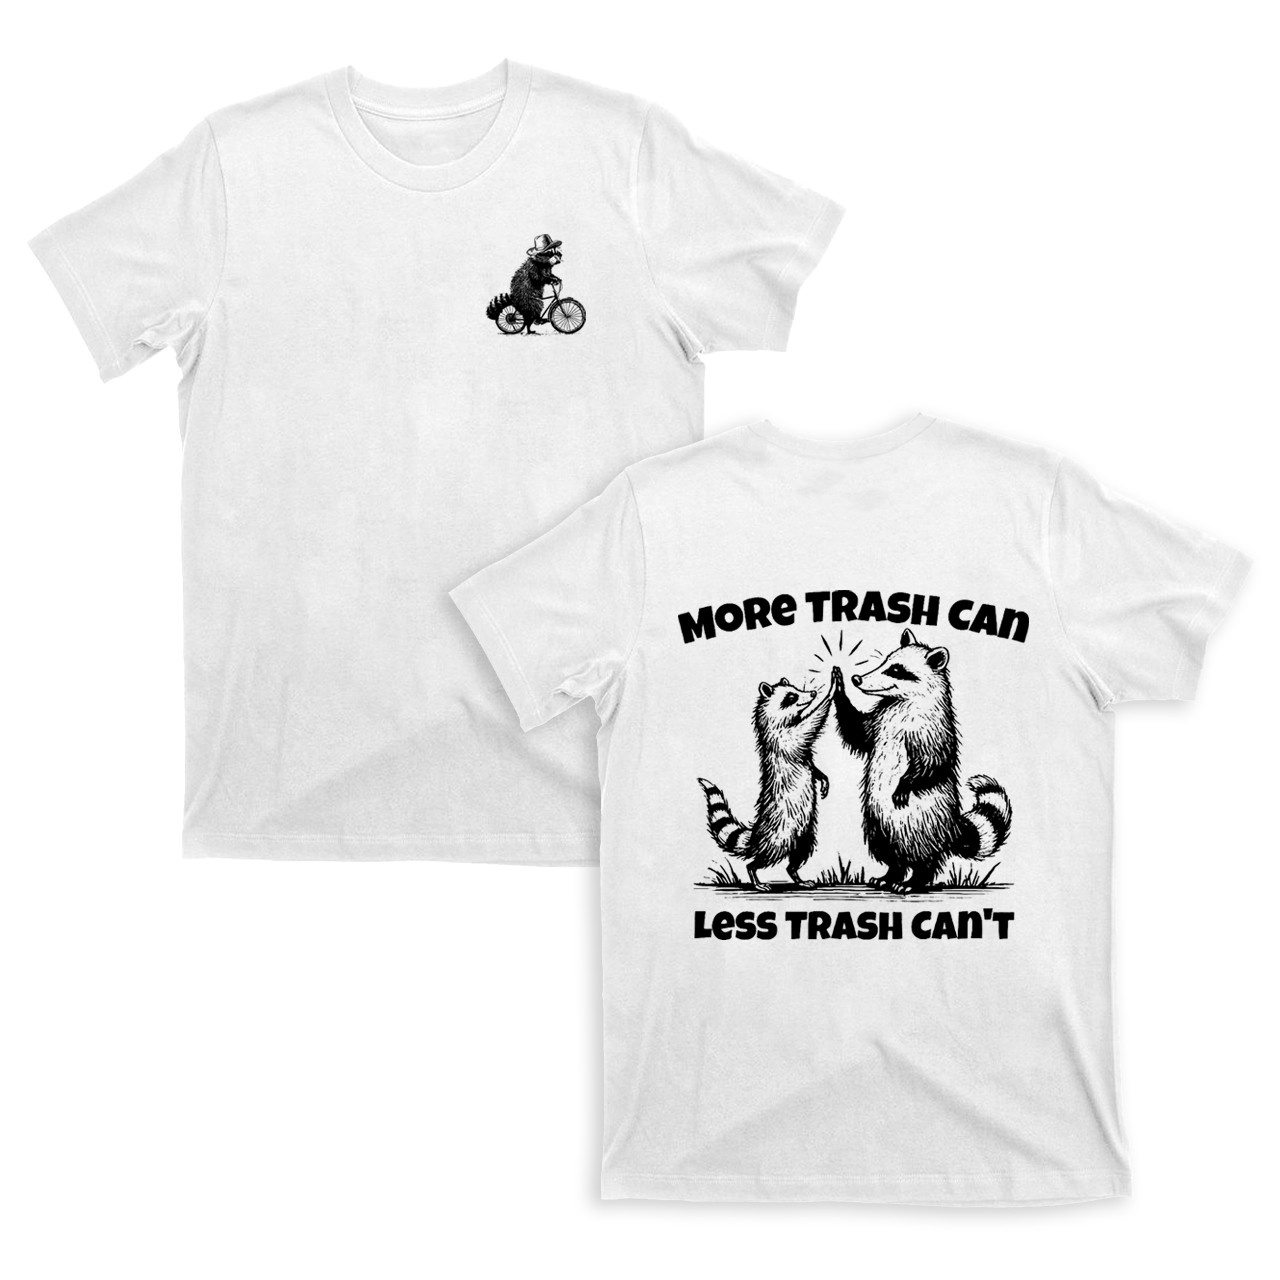 More Trash Can Less Trash Can't T-Shirts